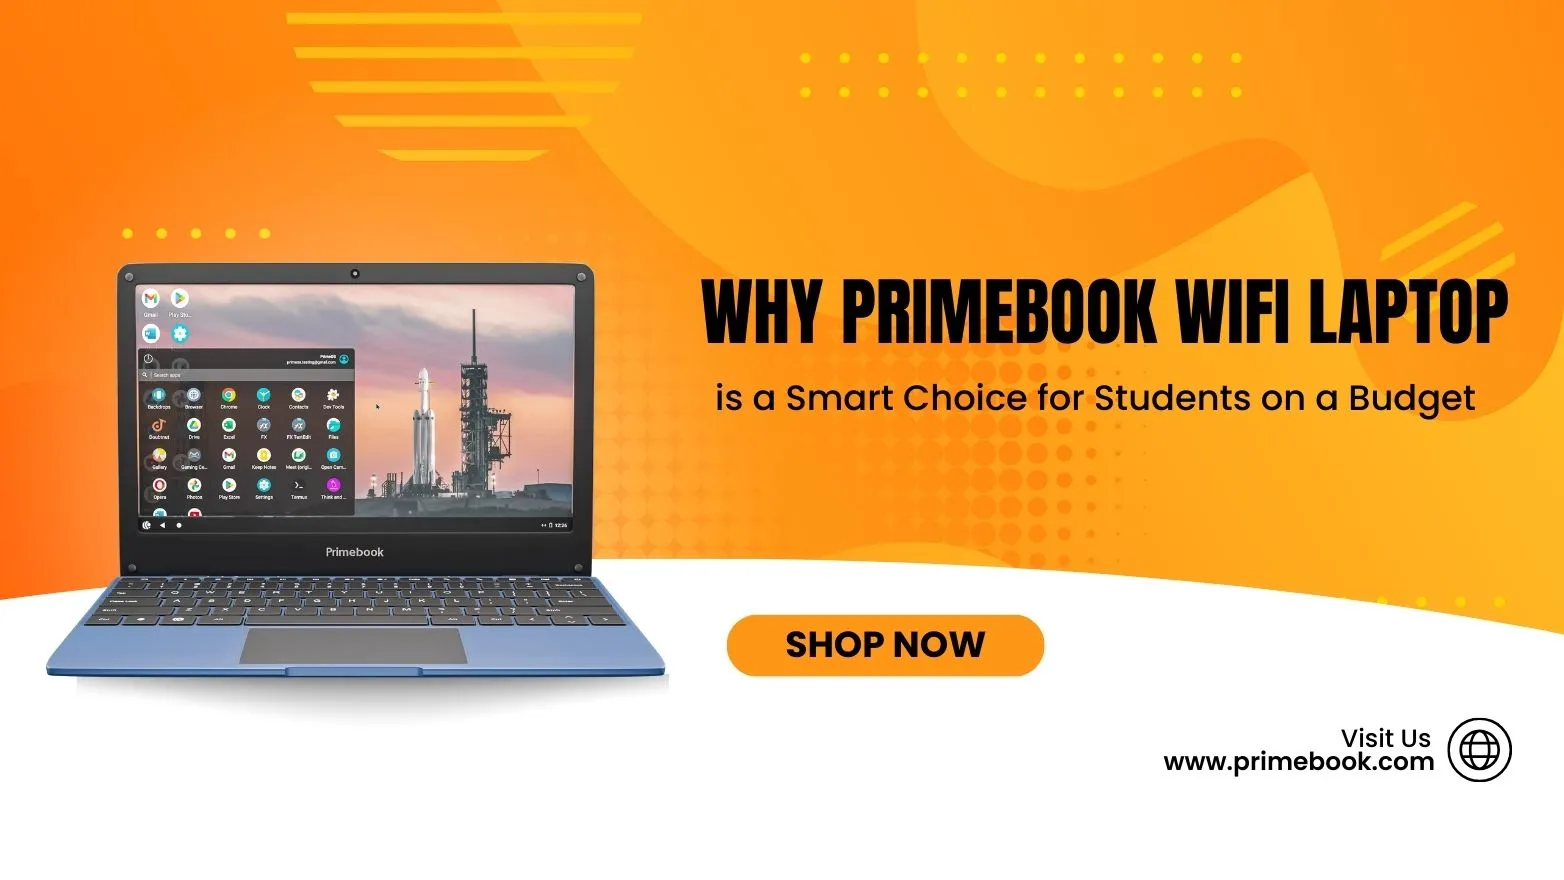 Tech Tips and Tricks: Why Primebook WiFi Laptop is a Smart Choice for Students on a Budget